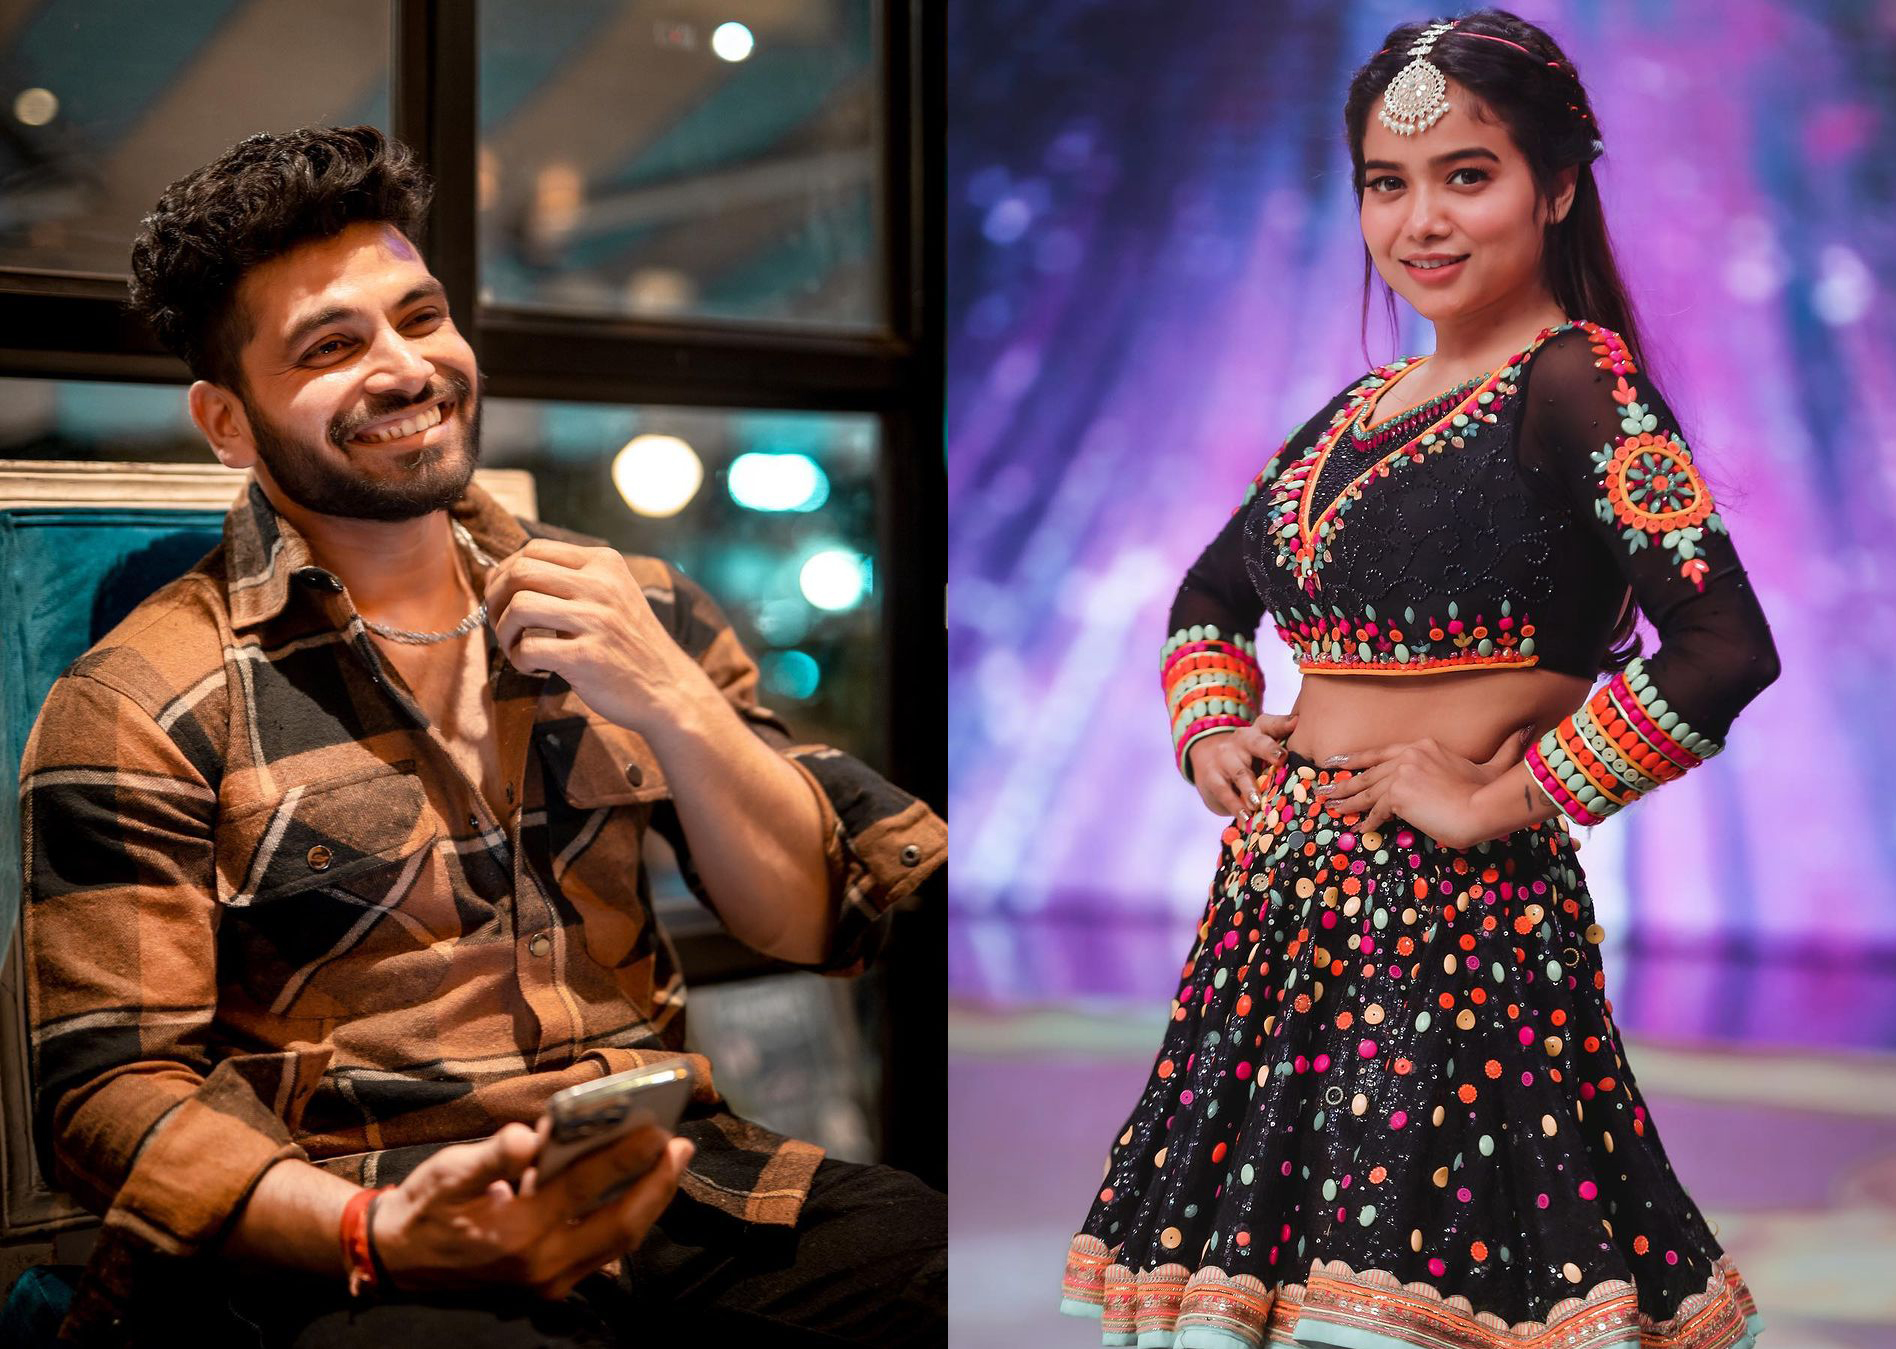 Jhalak Dikhhla Jaa 11: Shiv Thakare Says I Am Happy For Manisha Rani As She Is One Of The Deserving Contestants! 